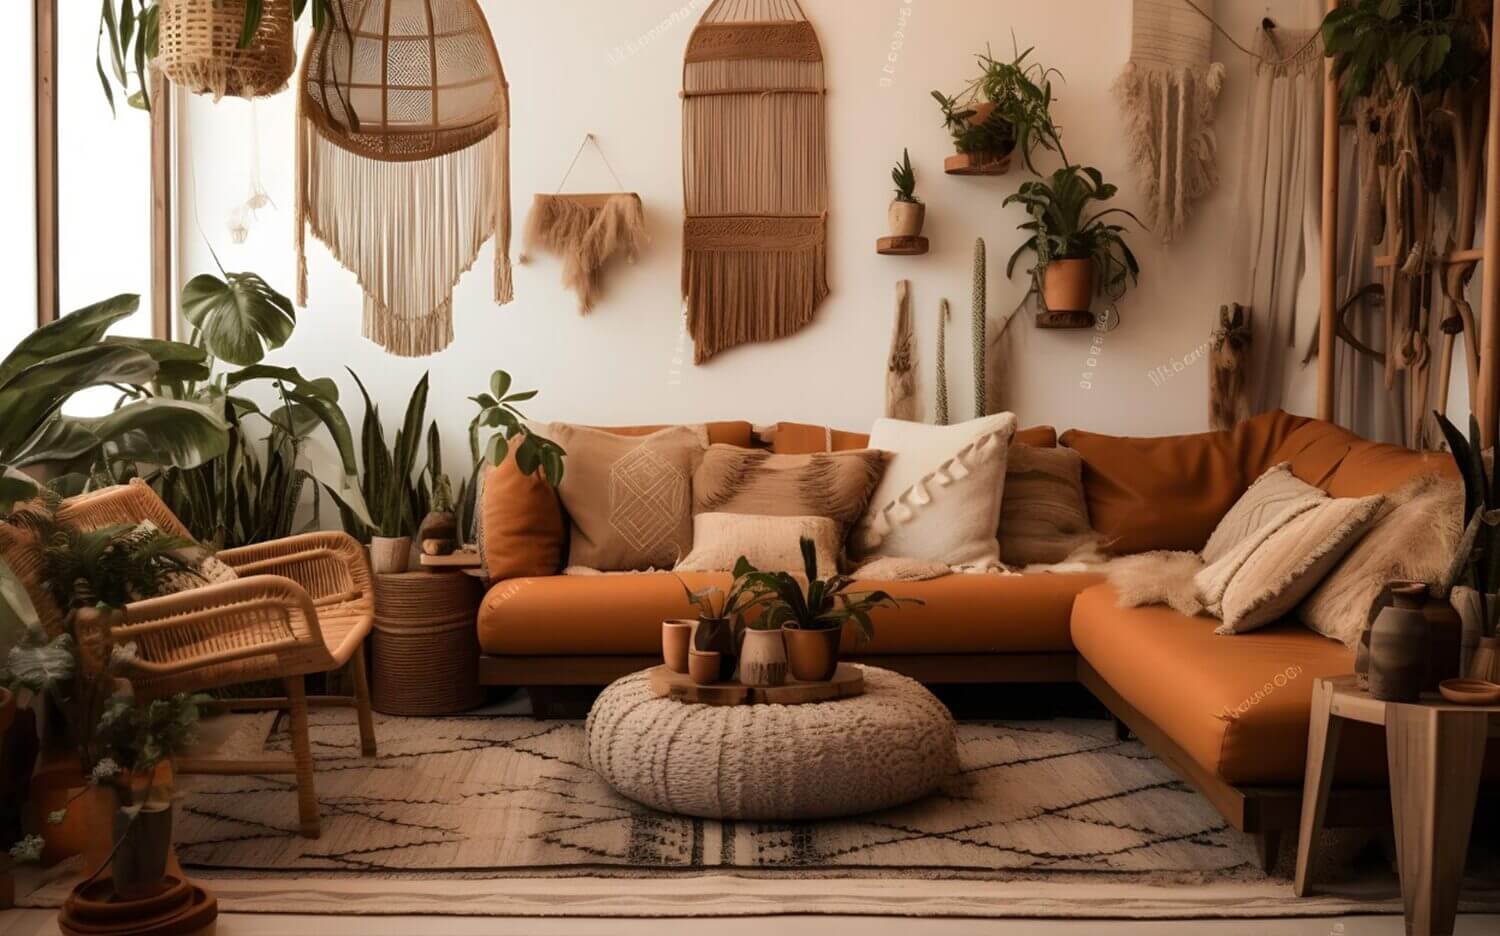 Earth-toned furniture decor in living room